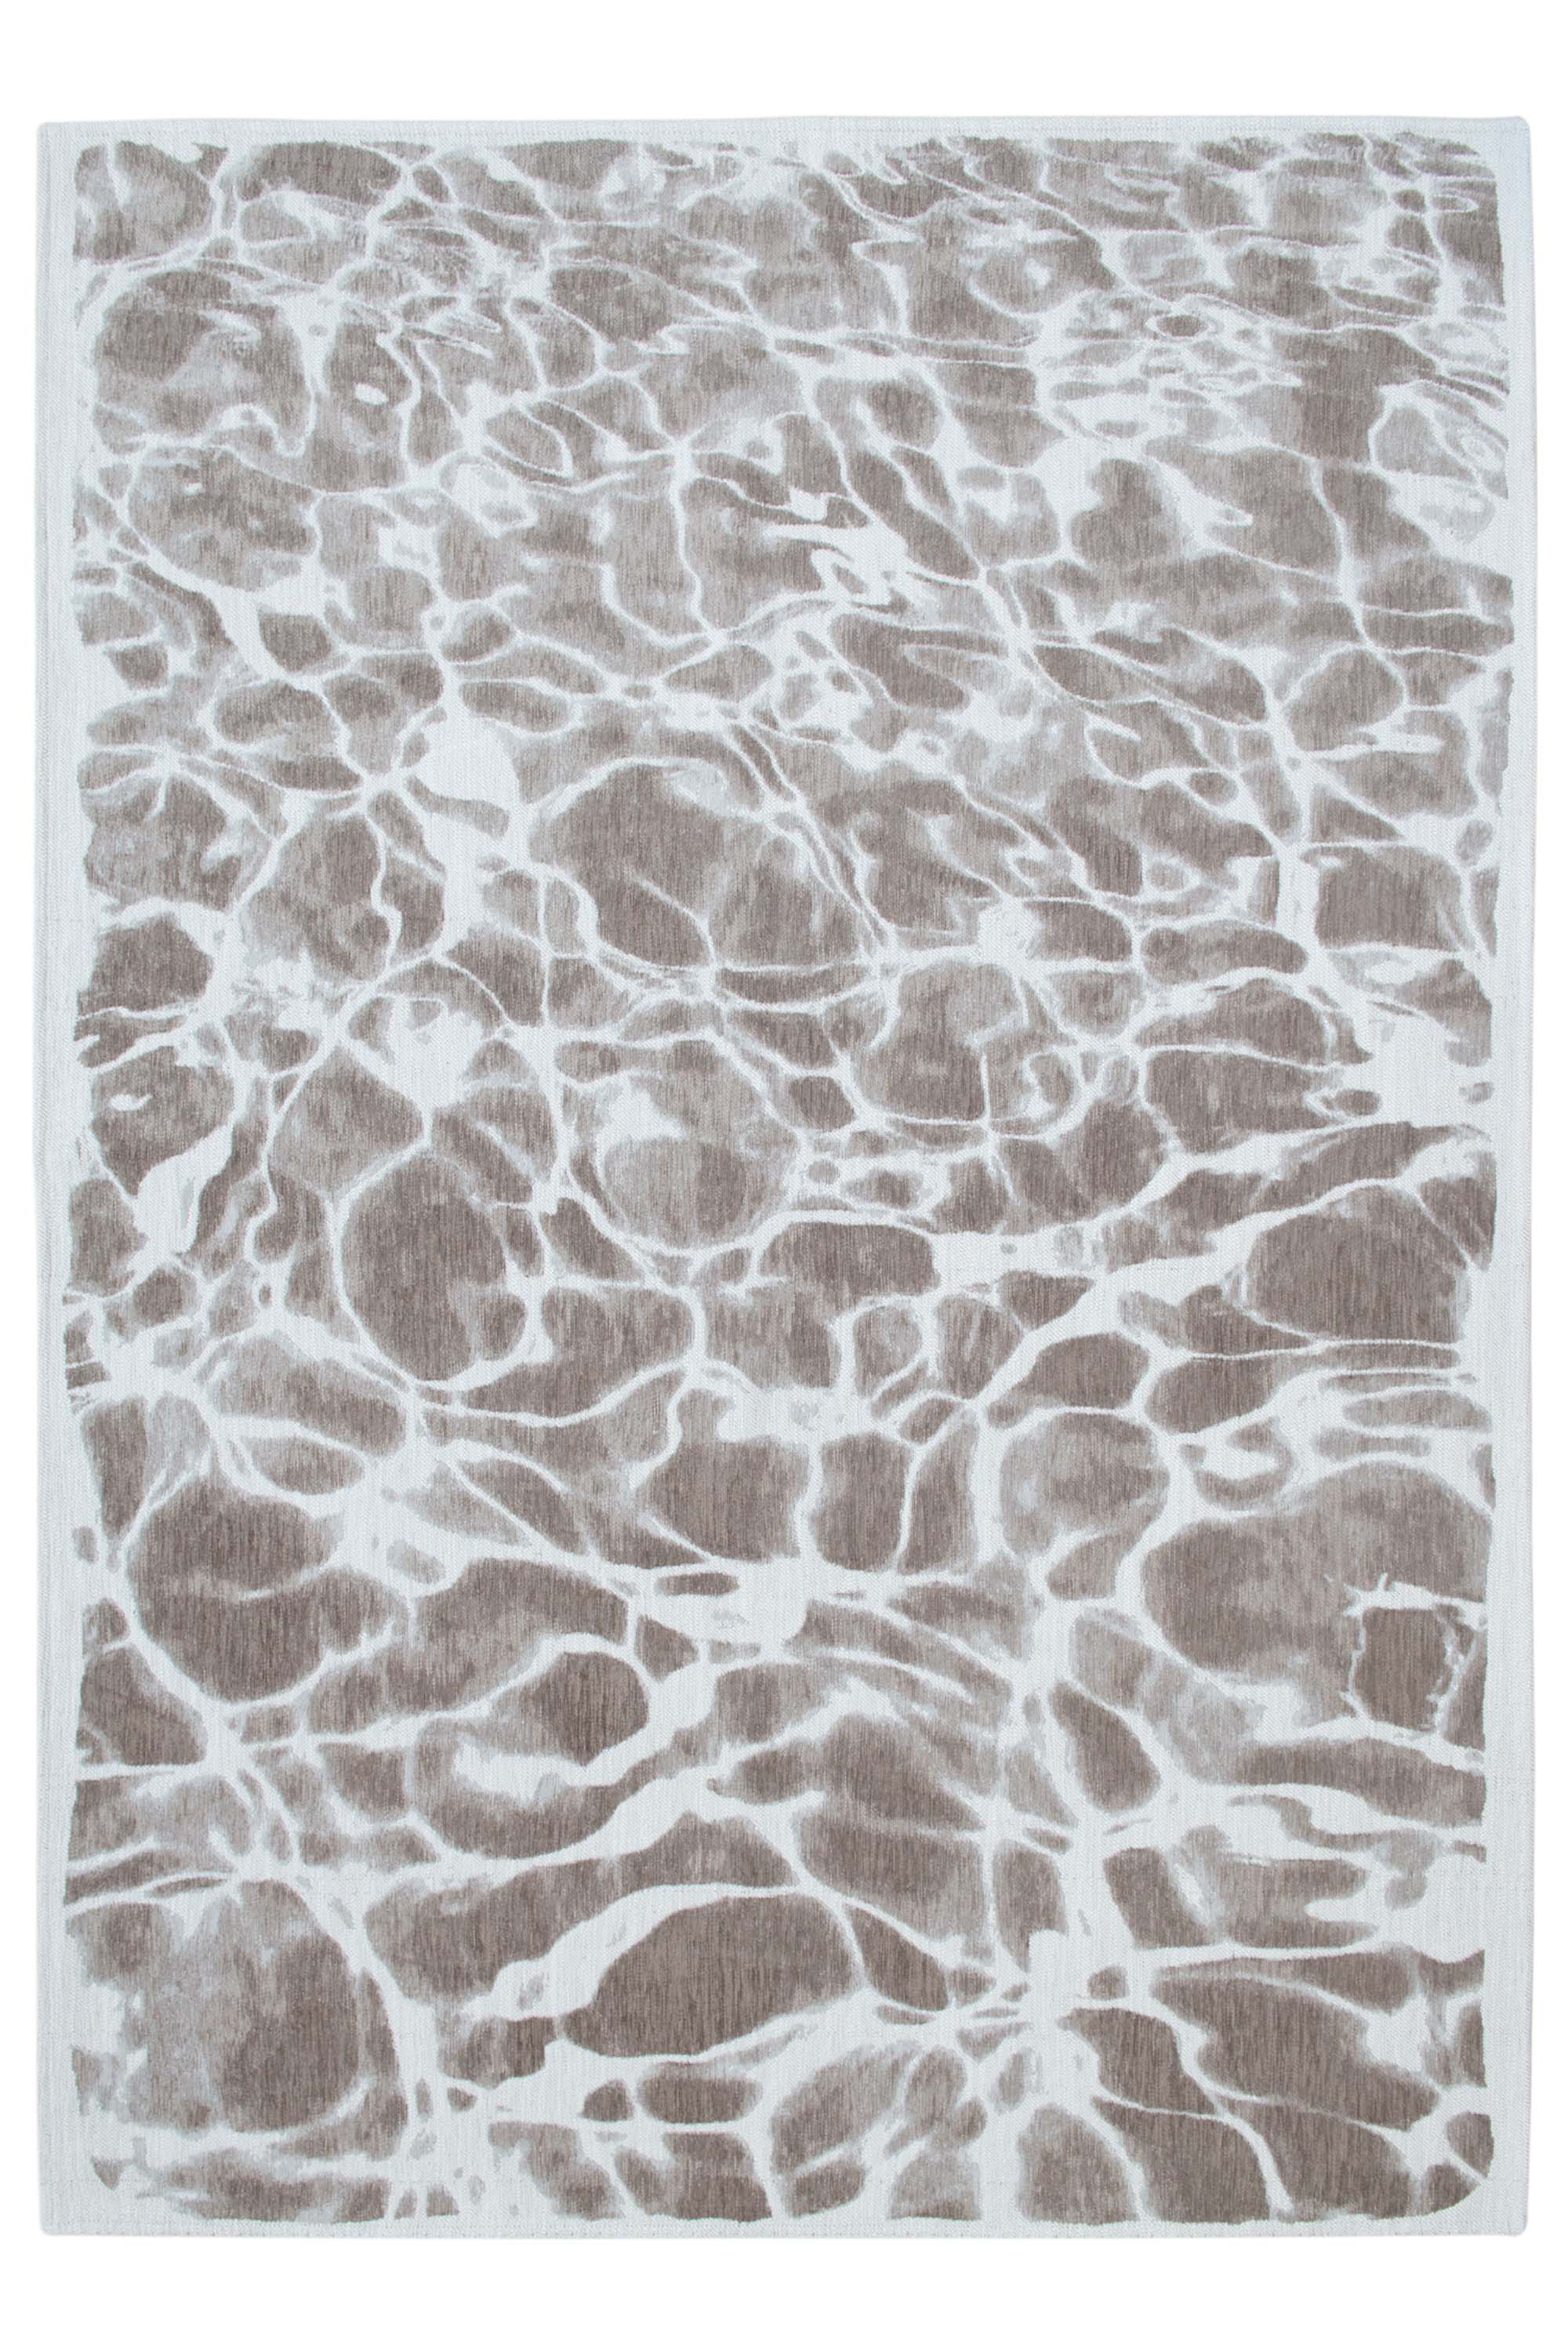 Modern rug with silver abstract water inspired pattern